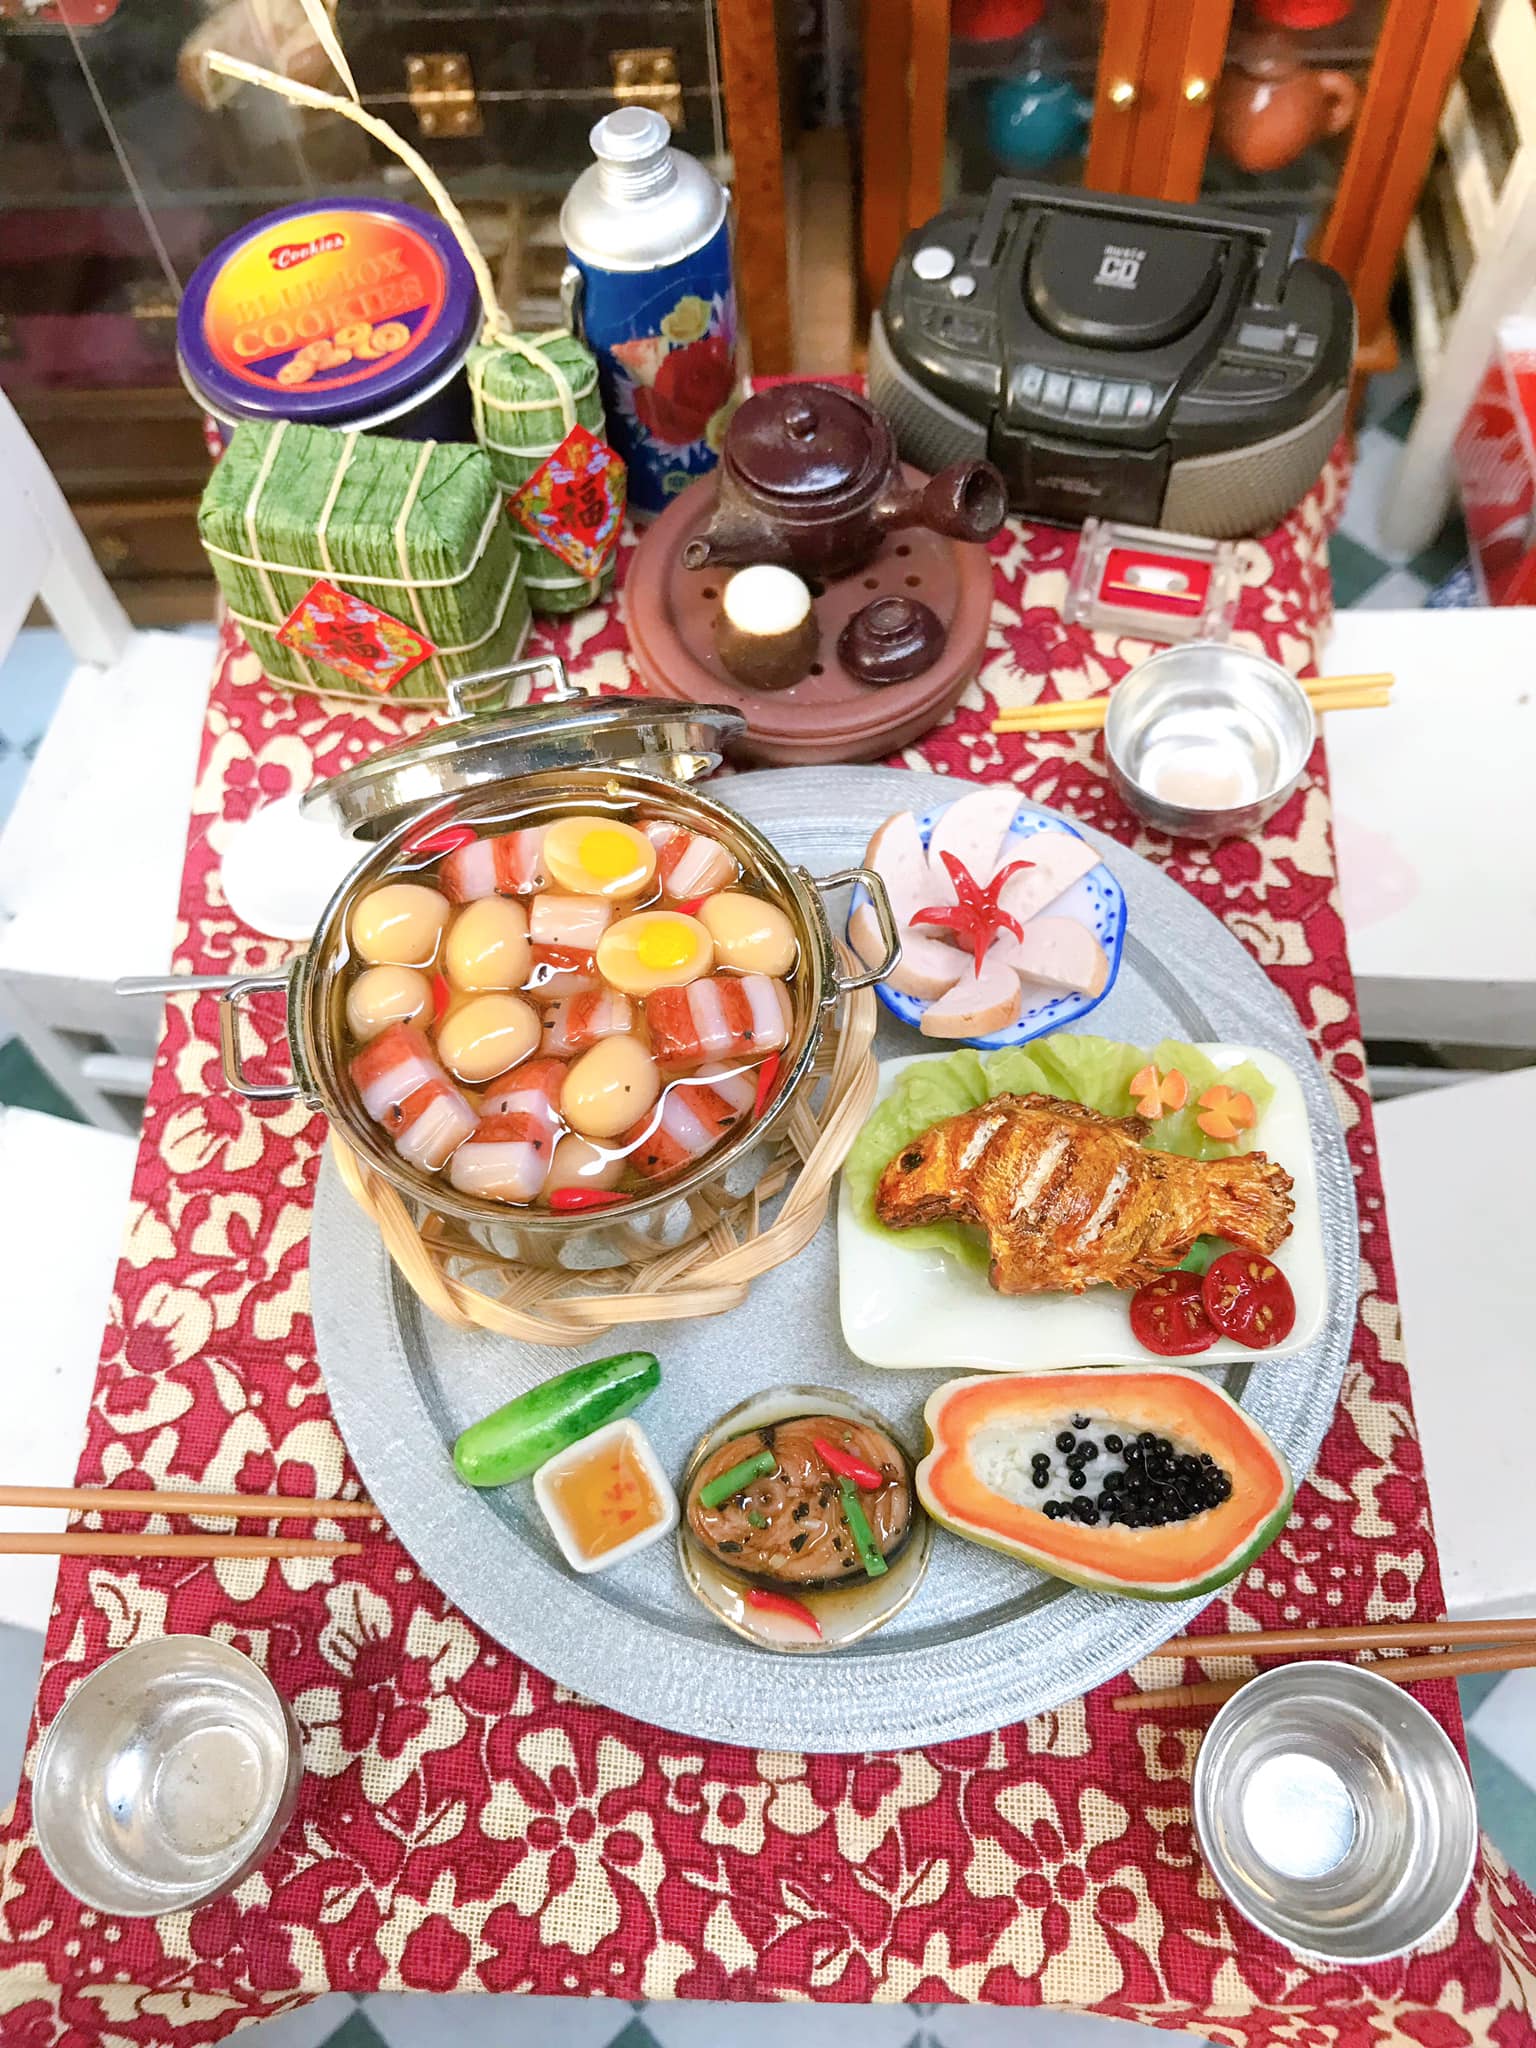 A traditional Vietnamese meal during the Lunar New Year holiday. Photo: Pham Thuy Thanh Thao